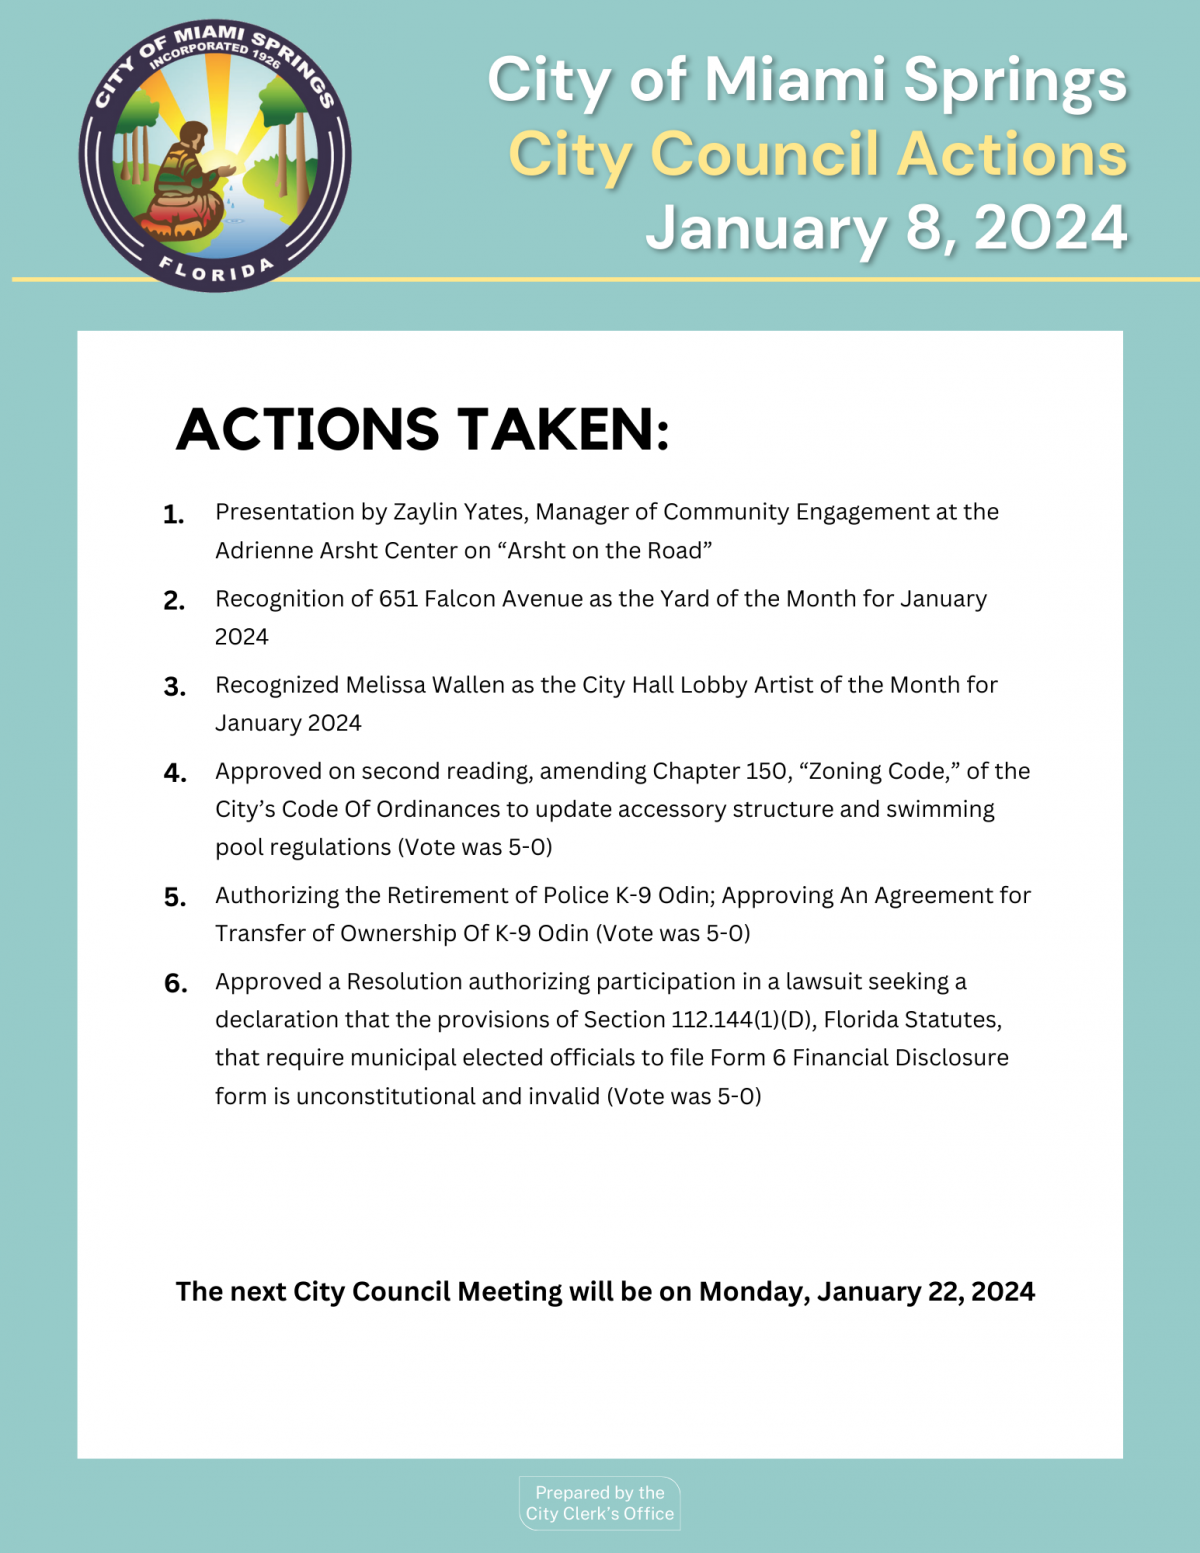 City Council Actions - January 8, 2024